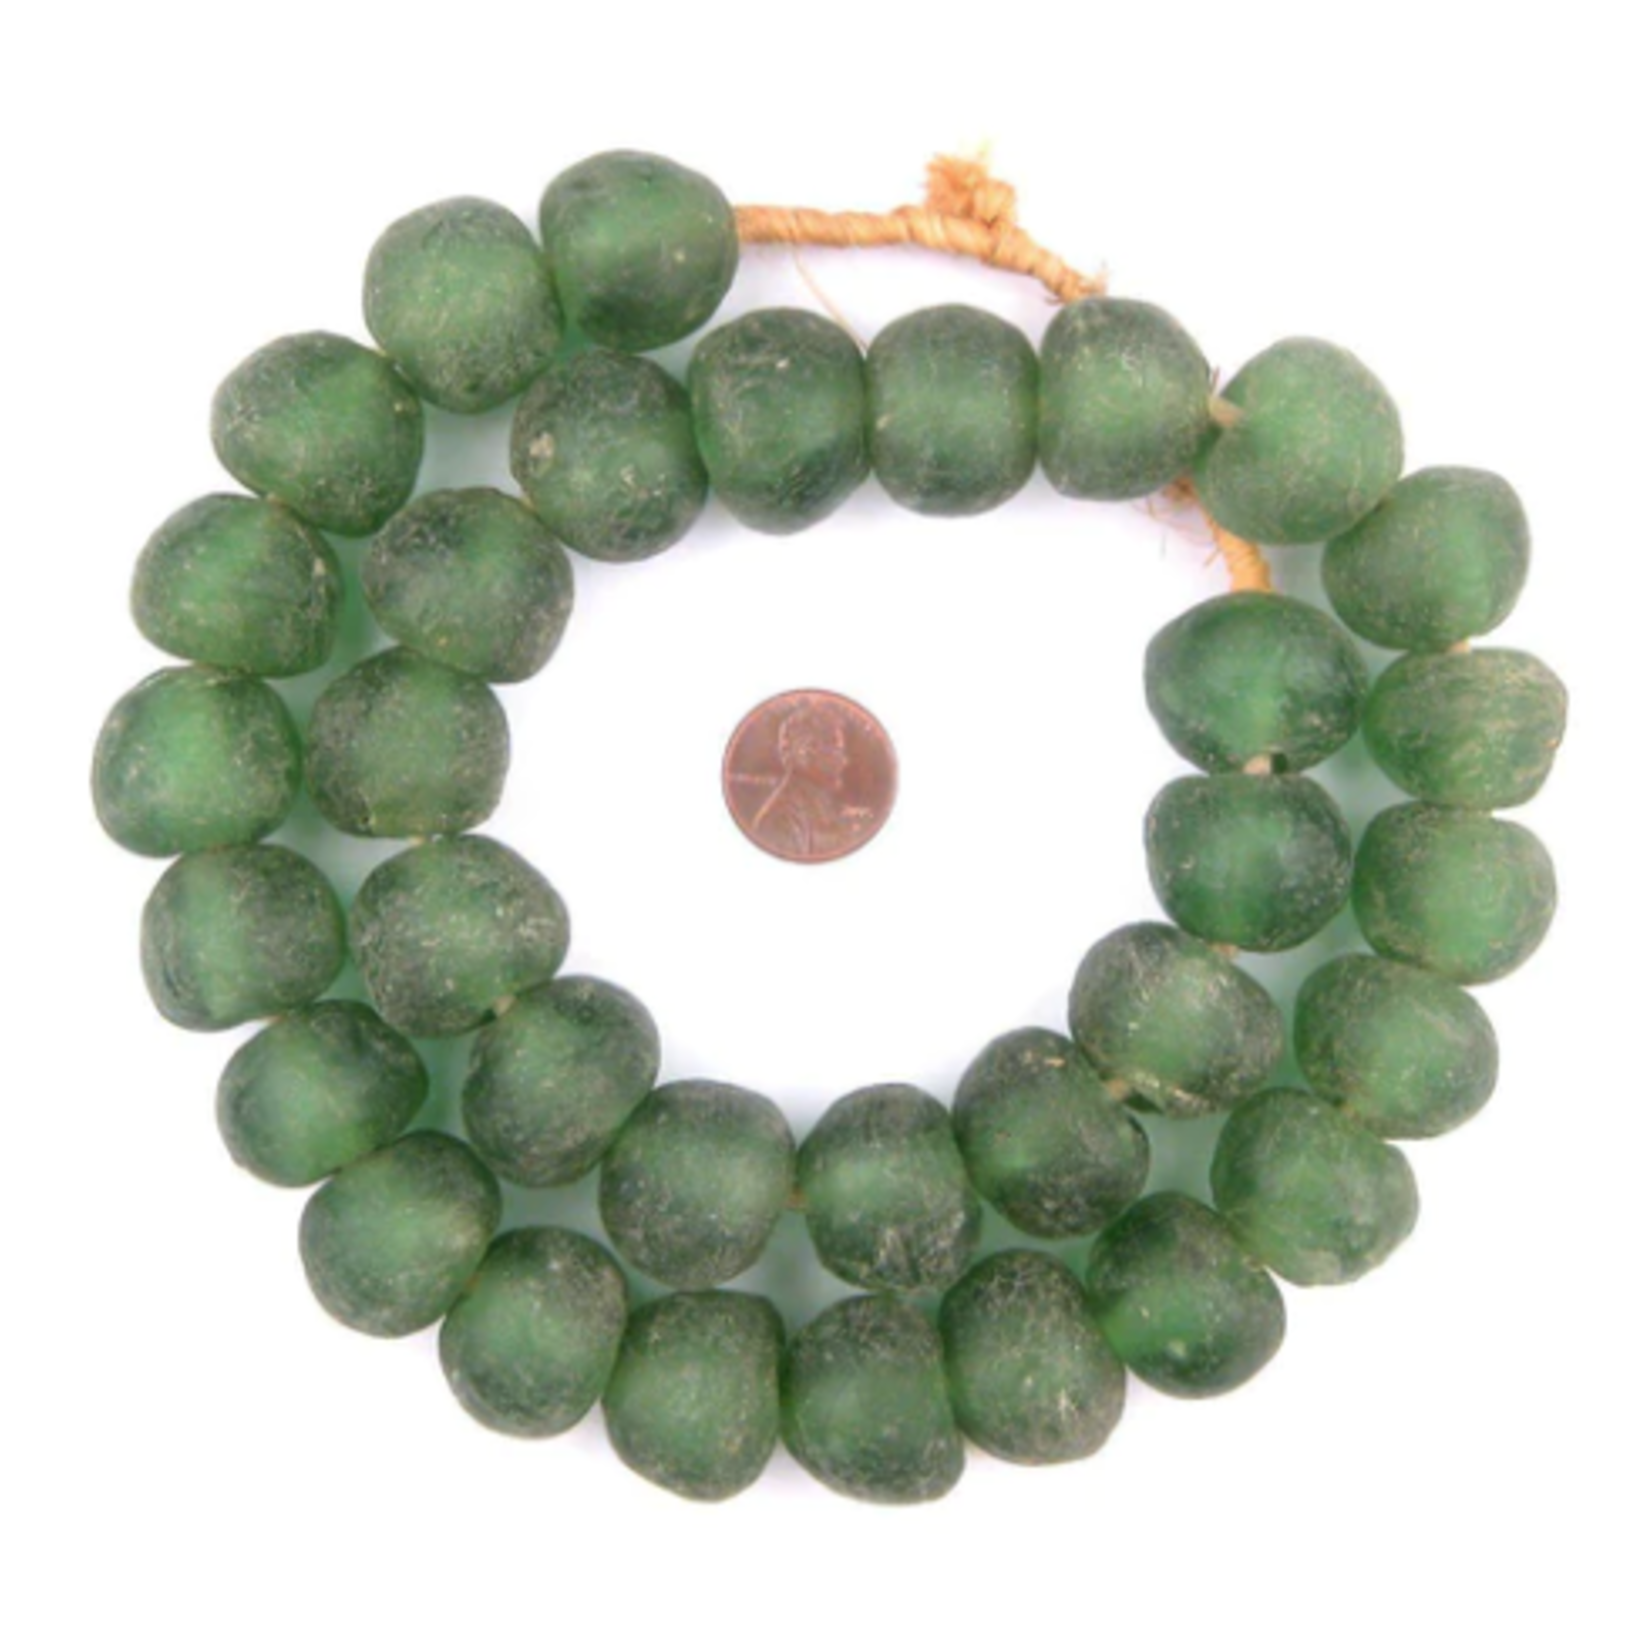 Outside The Box 26" Light Green Recycled 24mm Glass Beads